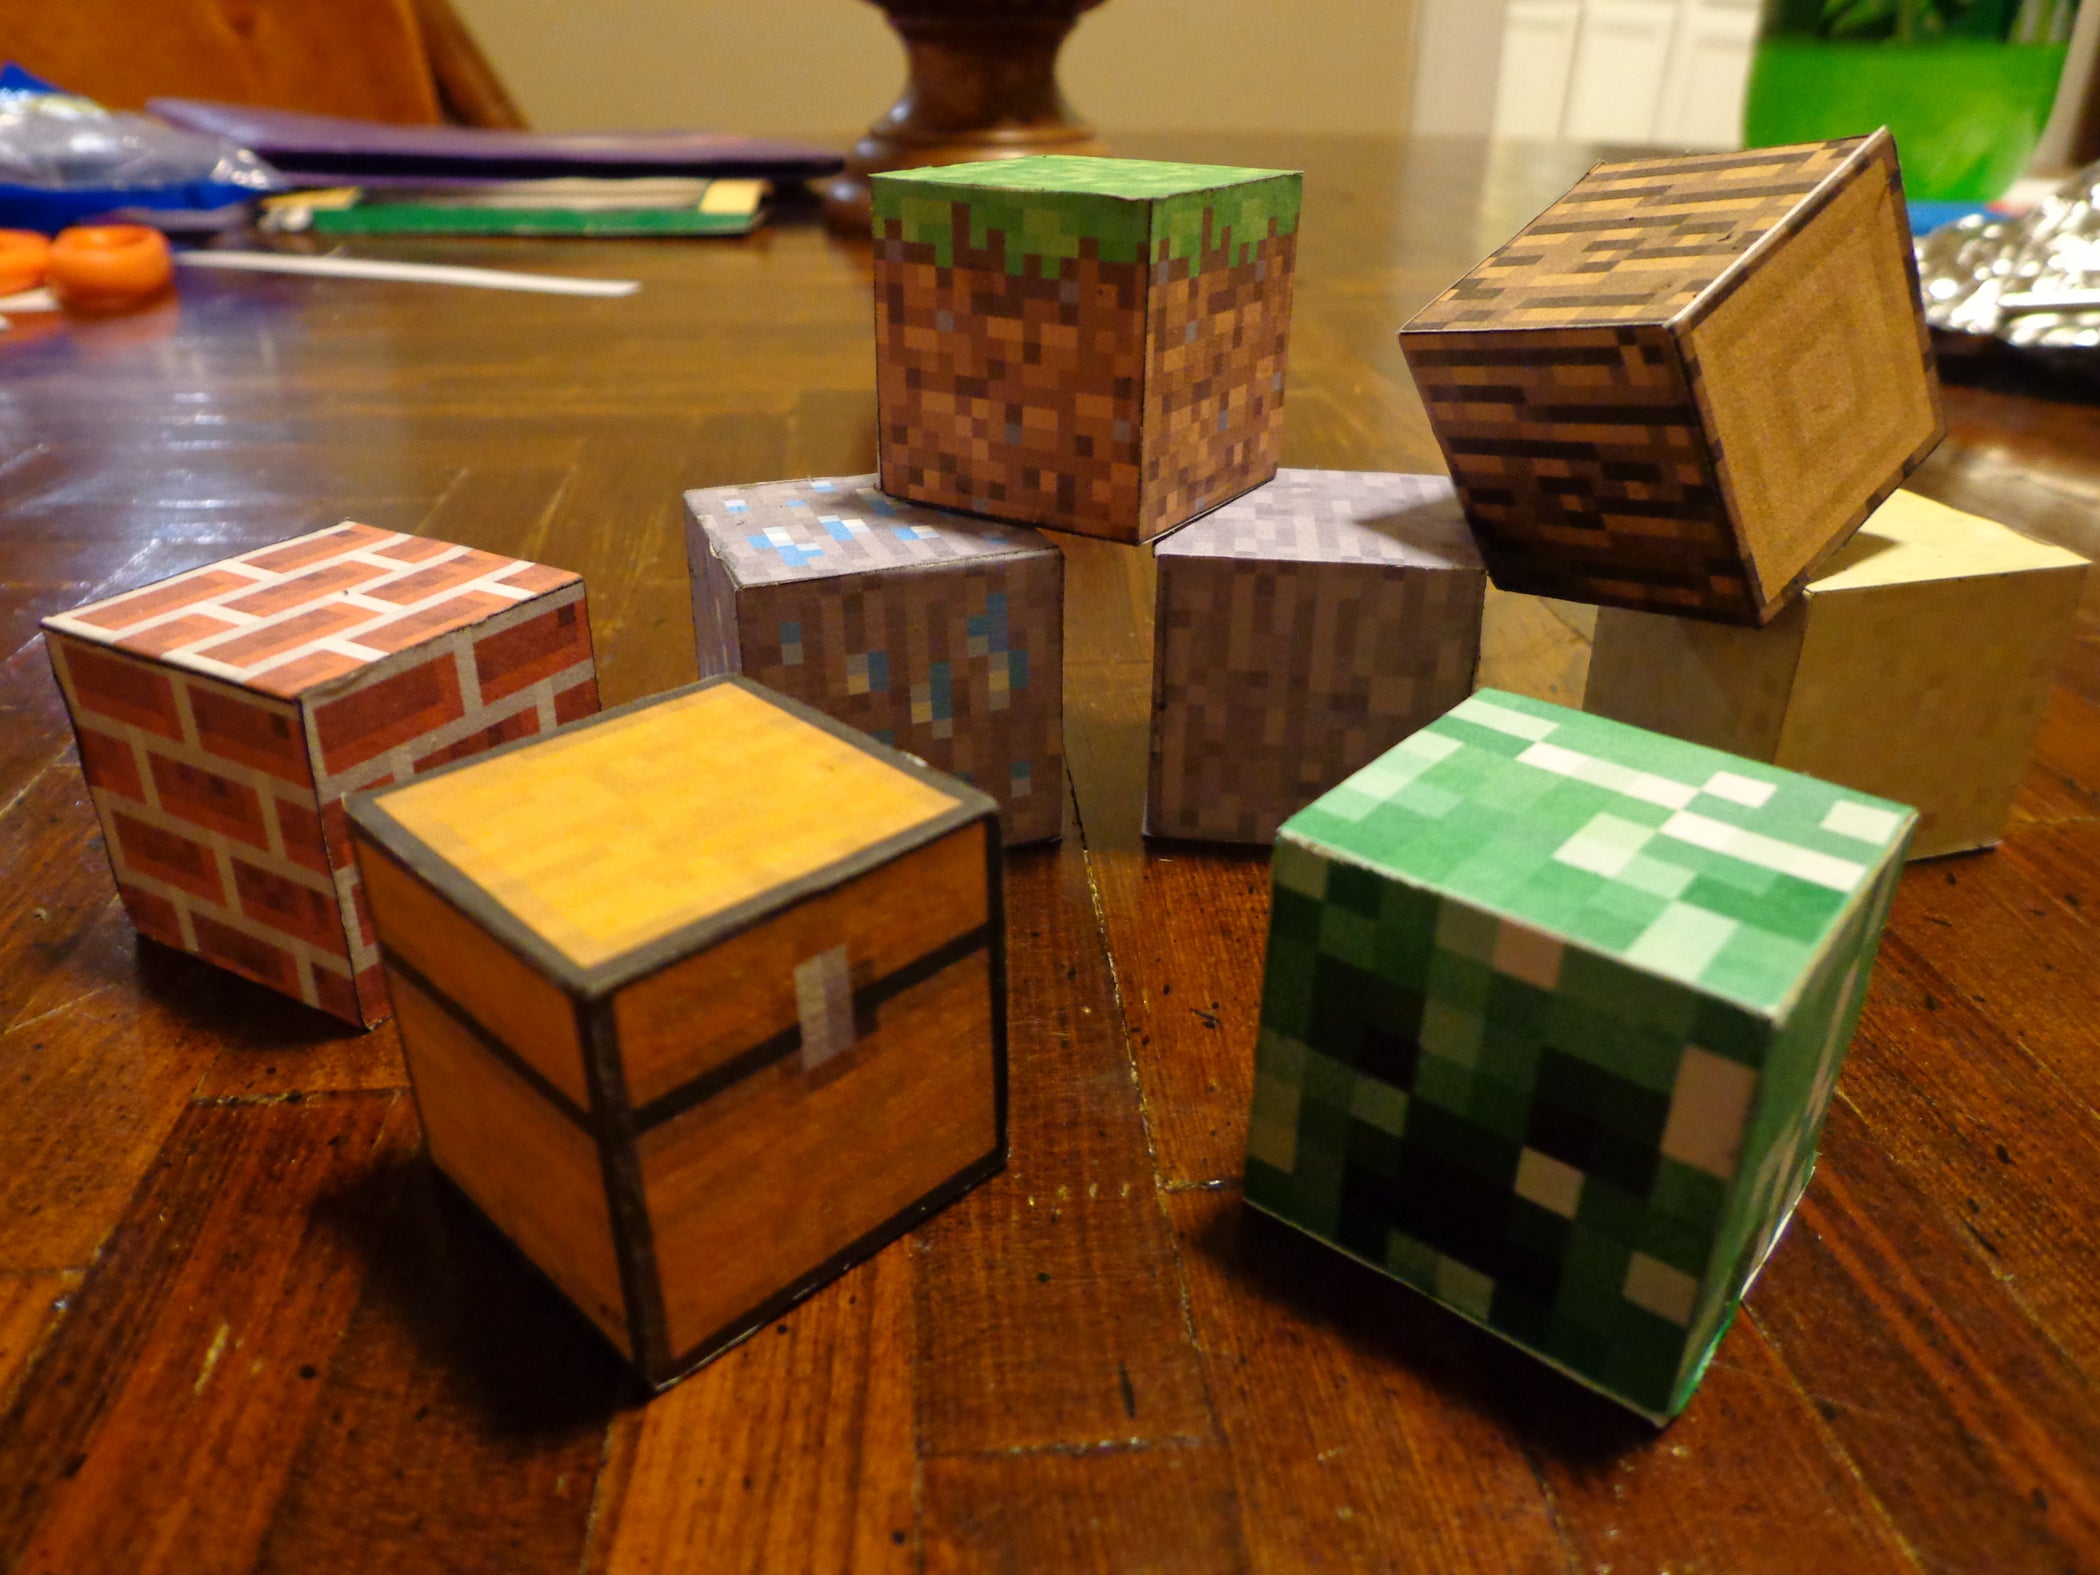 REAL Minecraft Blocks!: 7 Steps (with Pictures)